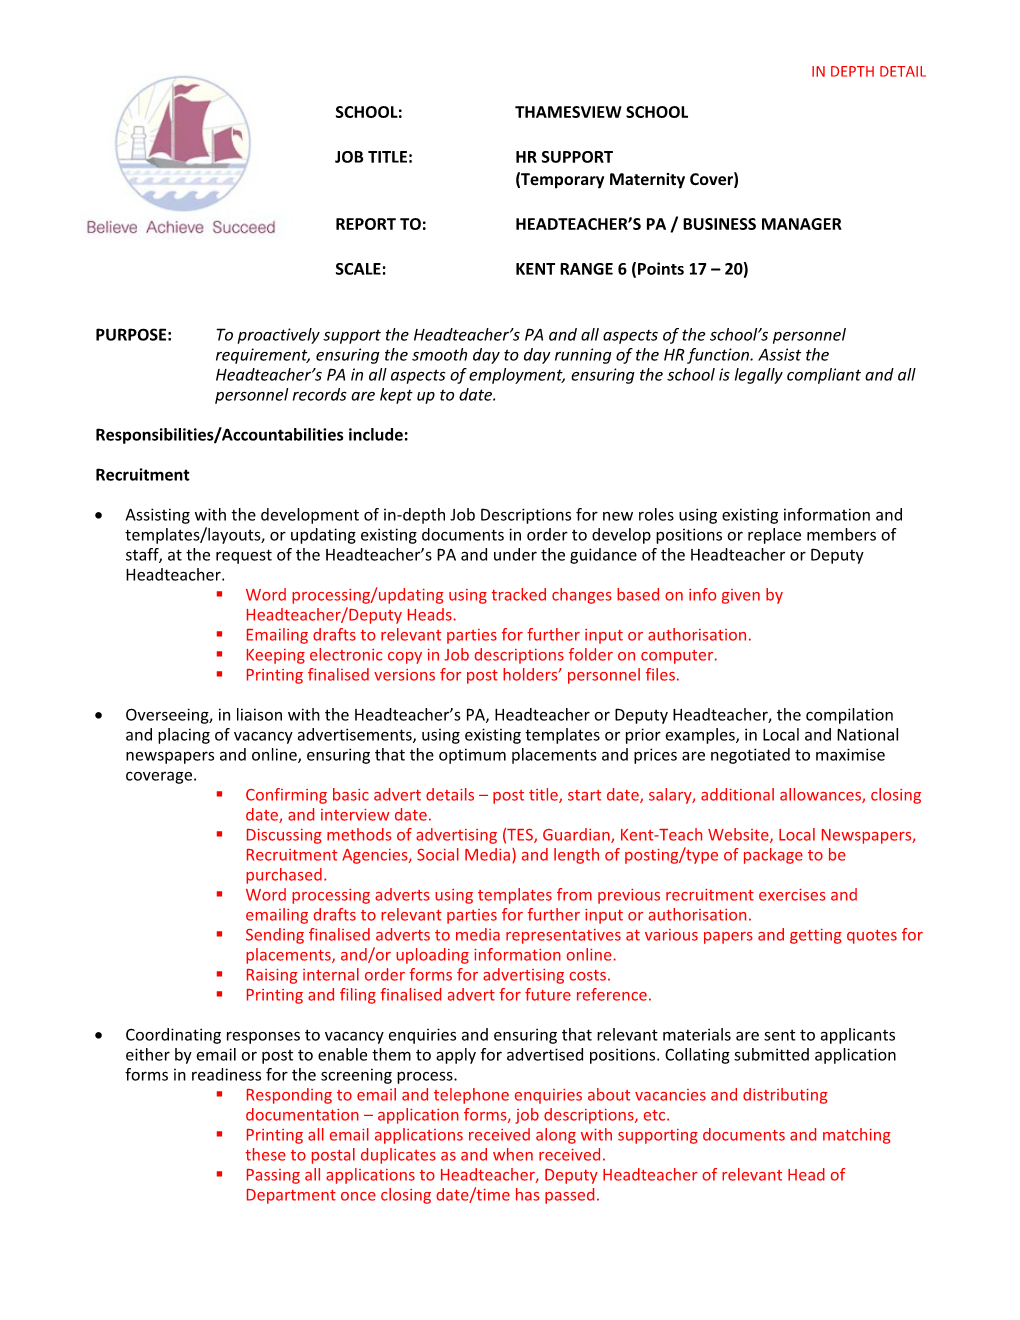 Report To:Headteacher S Pa / Business Manager